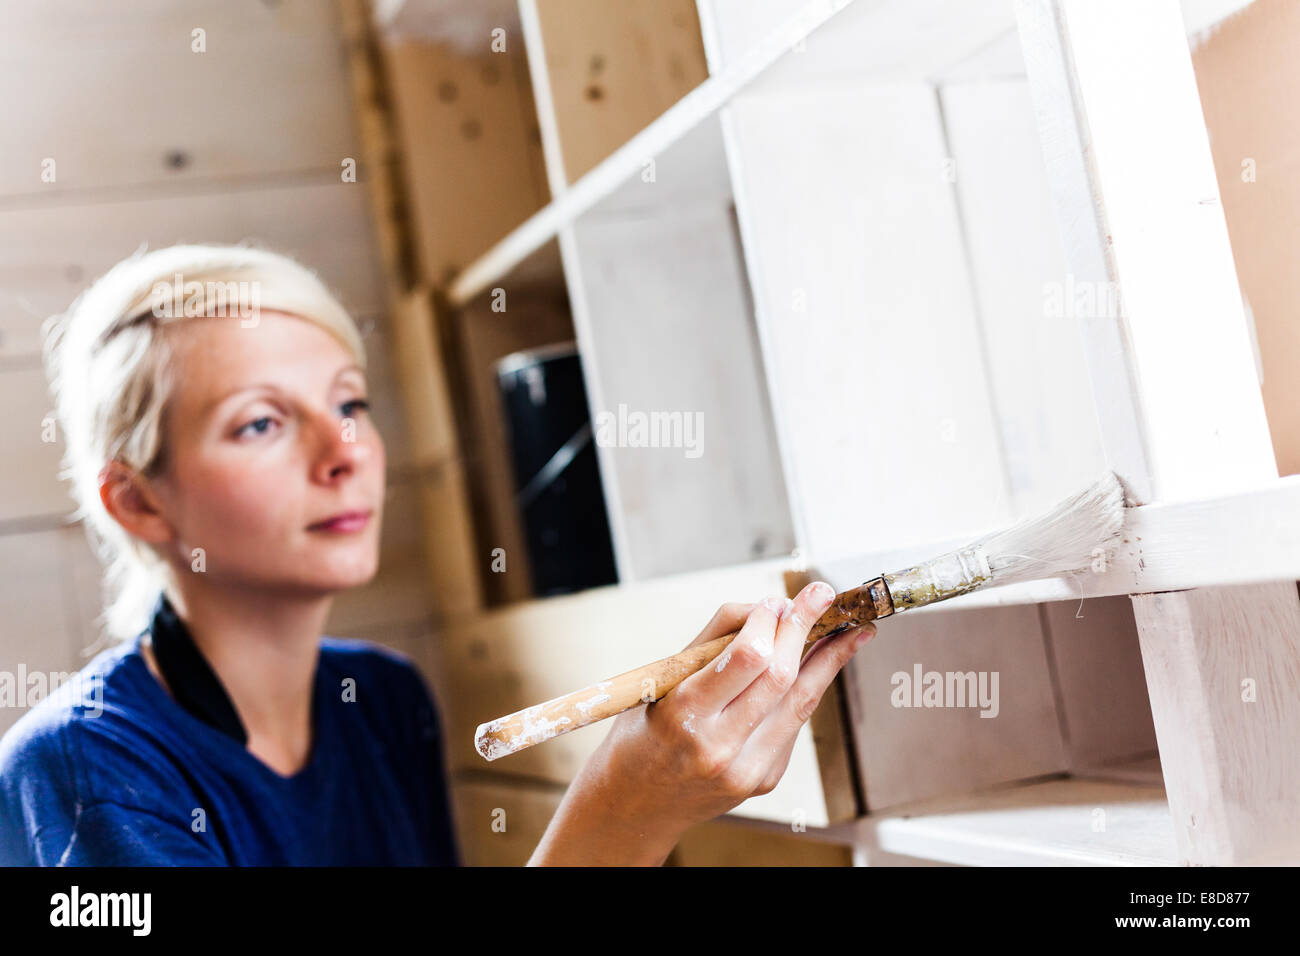 Real Home Renovation (not studio) - Woman Applying White Paint on a Wood Library. Stock Photo